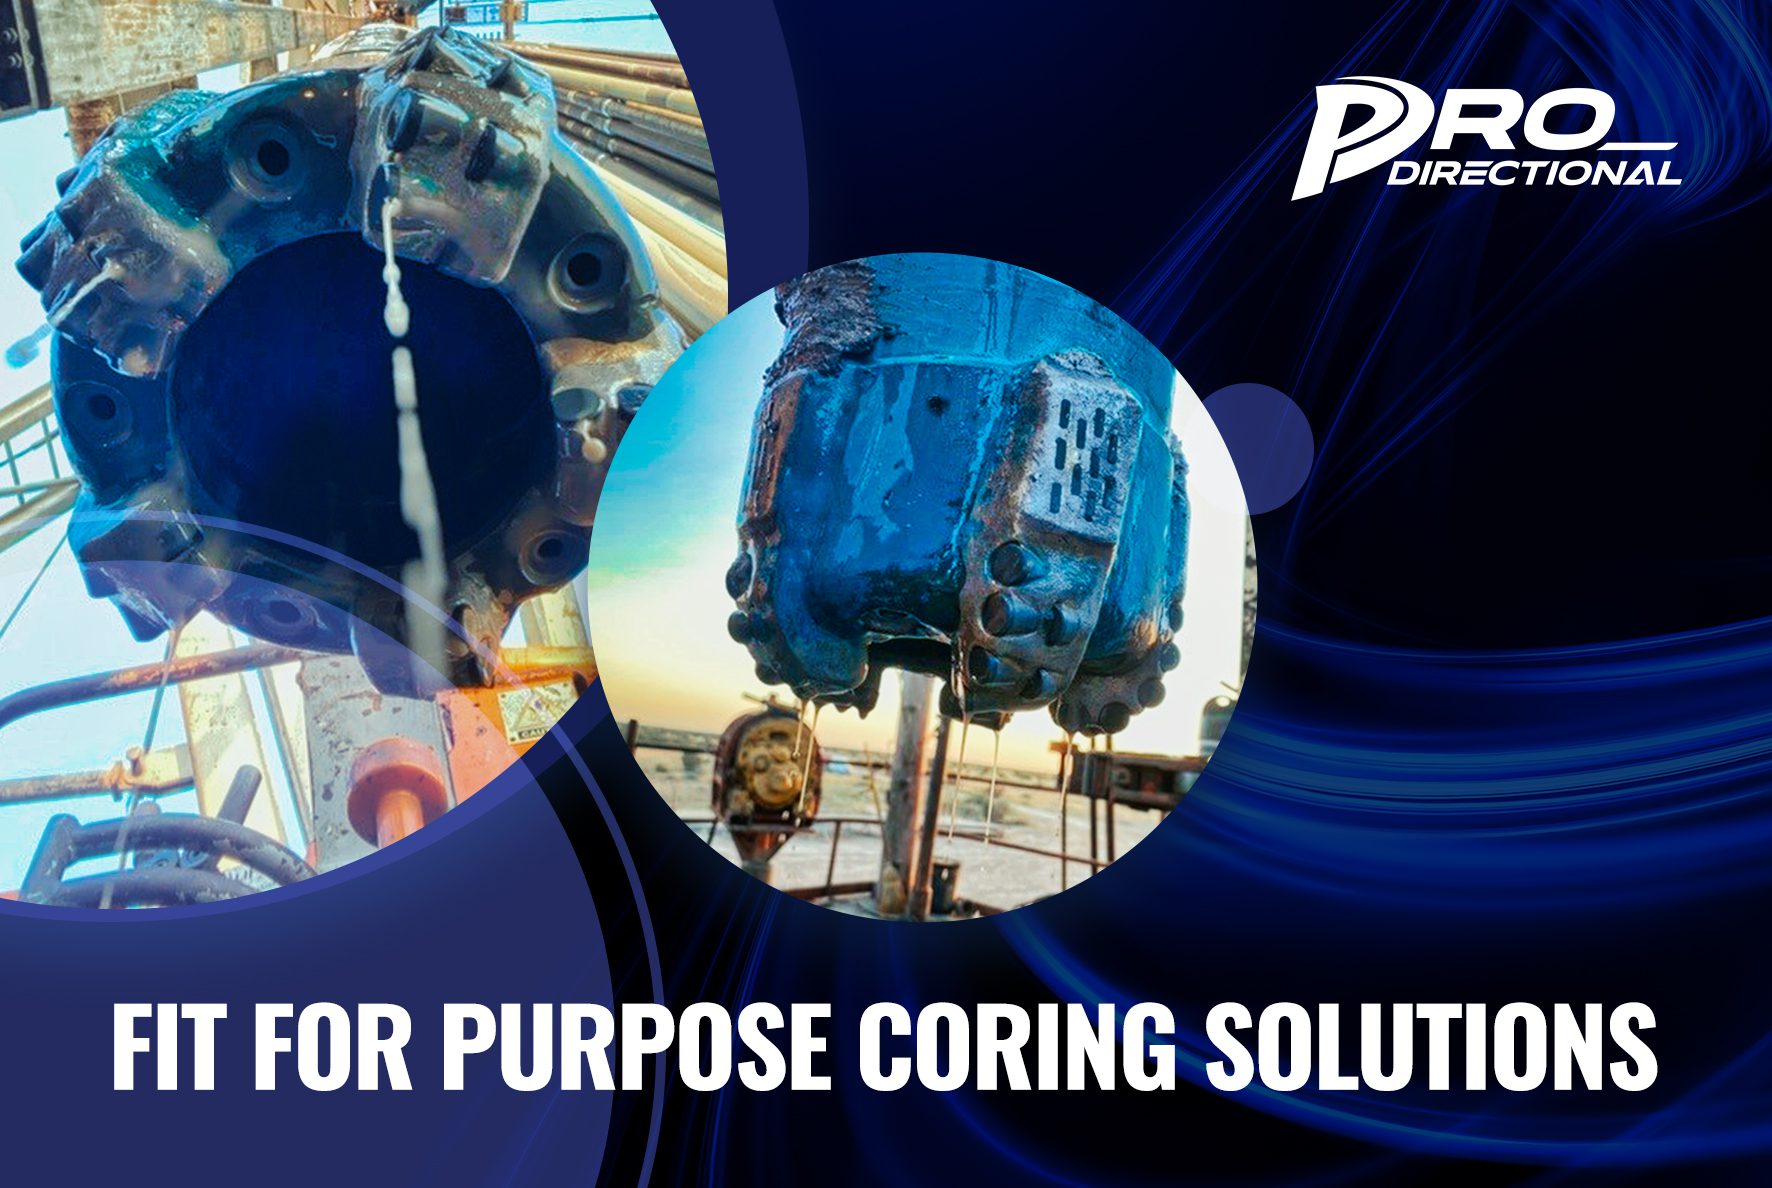 Featured image for “Fit for purpose coring solutions”